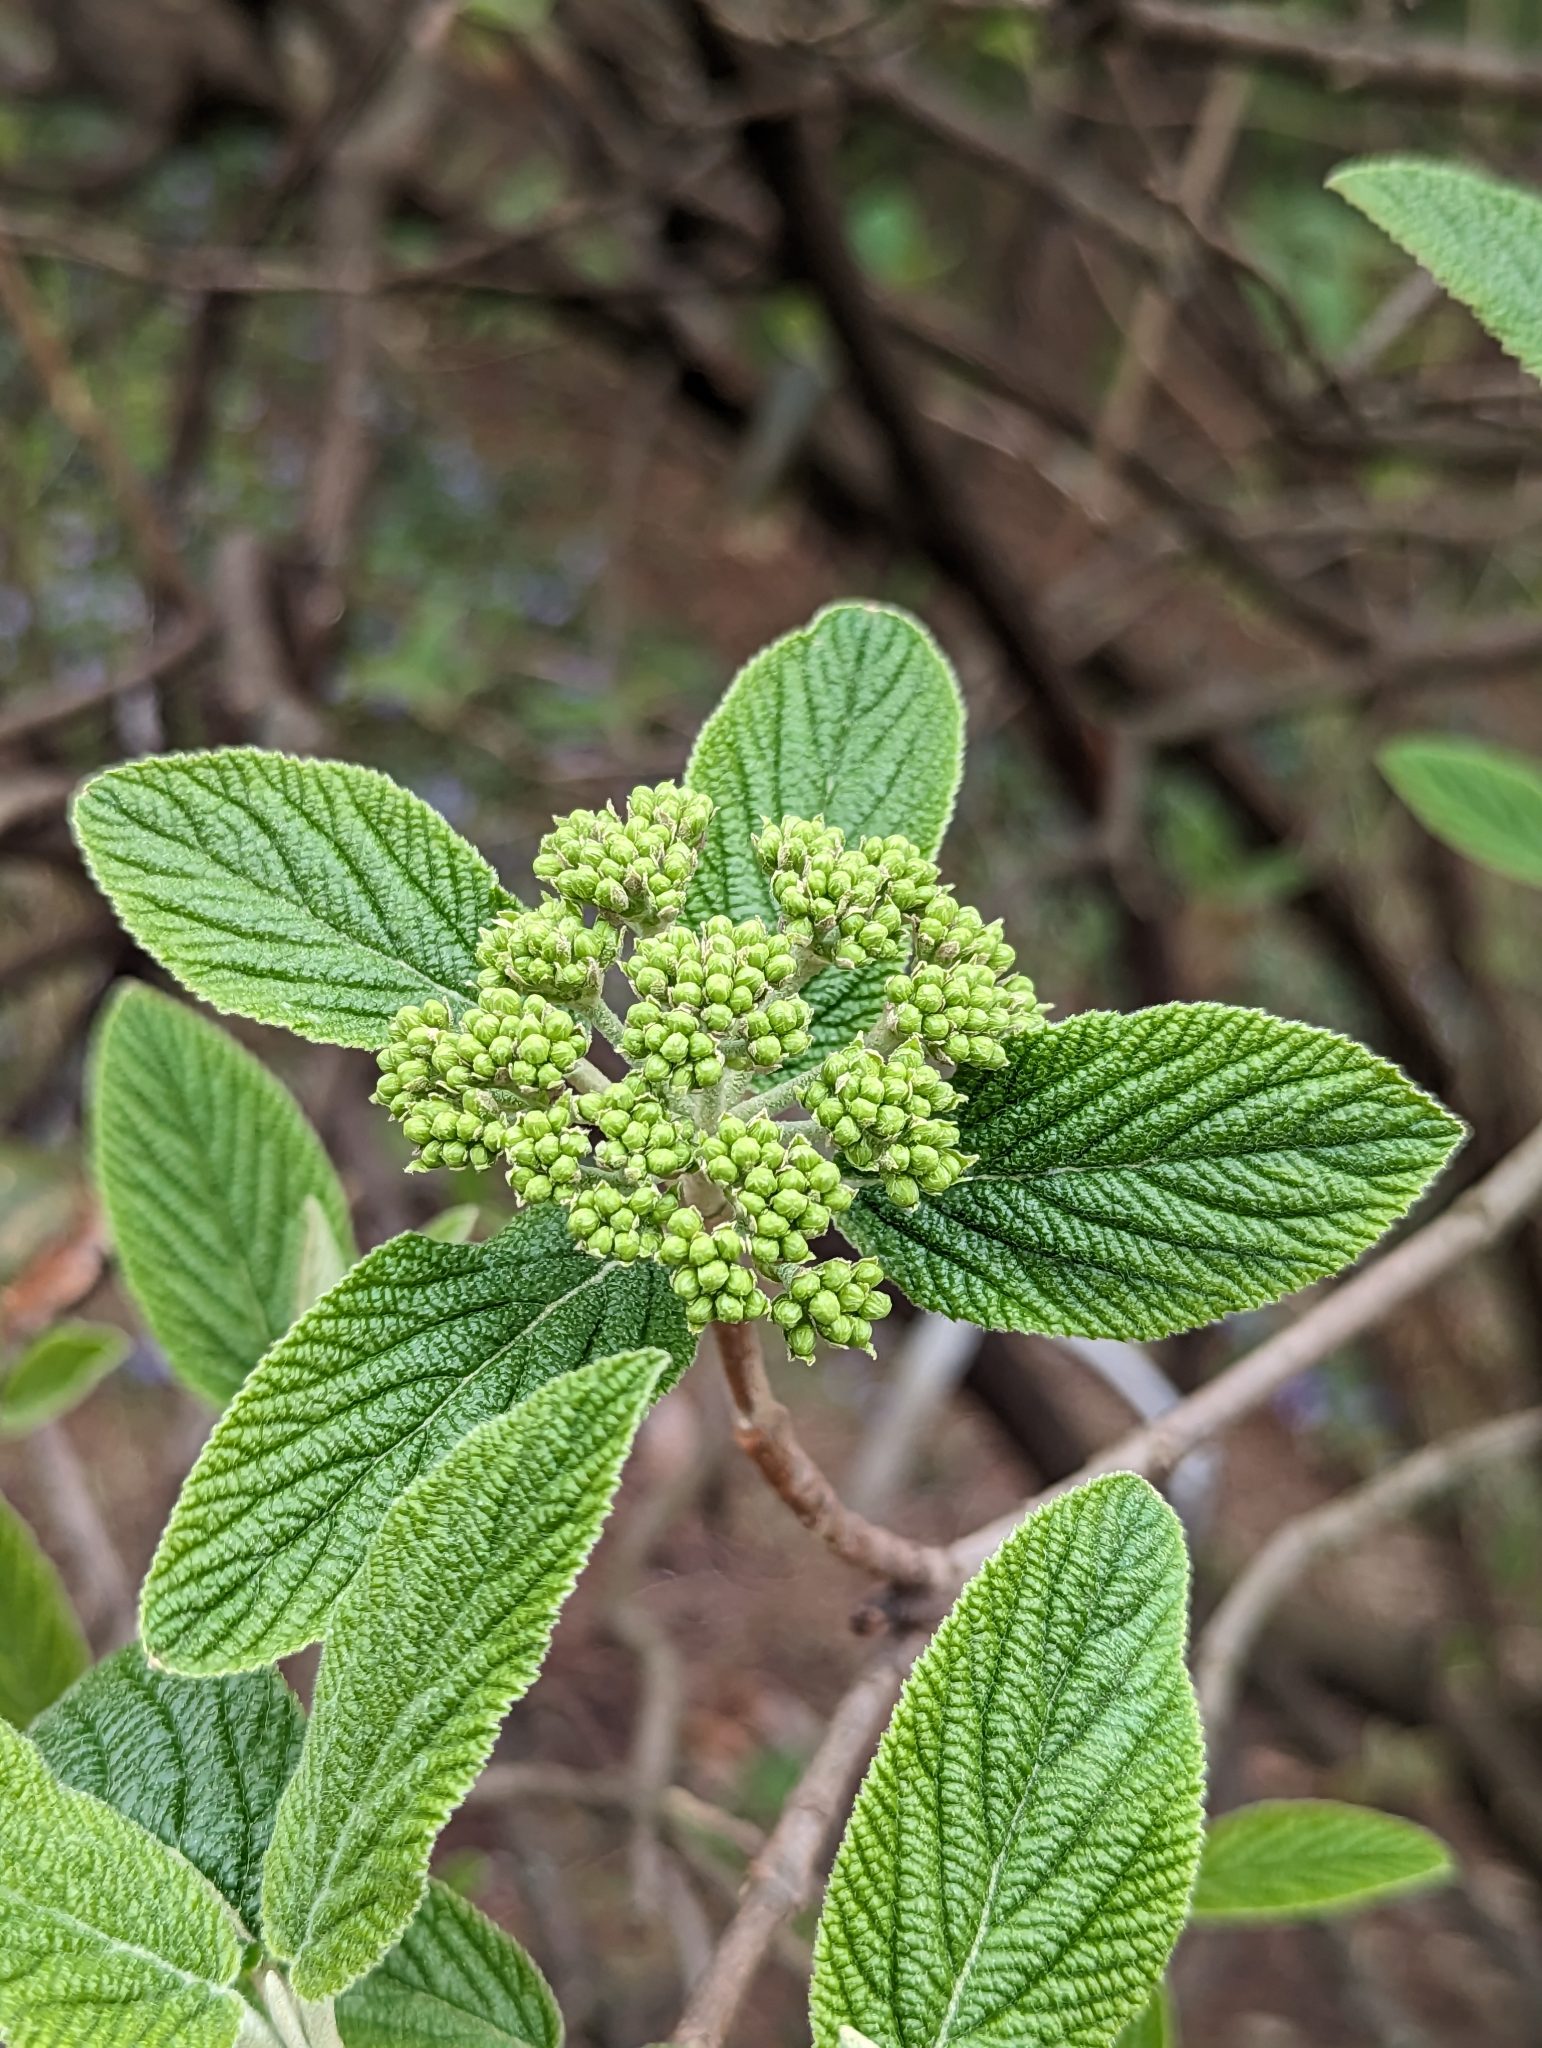 Tiny green buds in the center of new green leaves